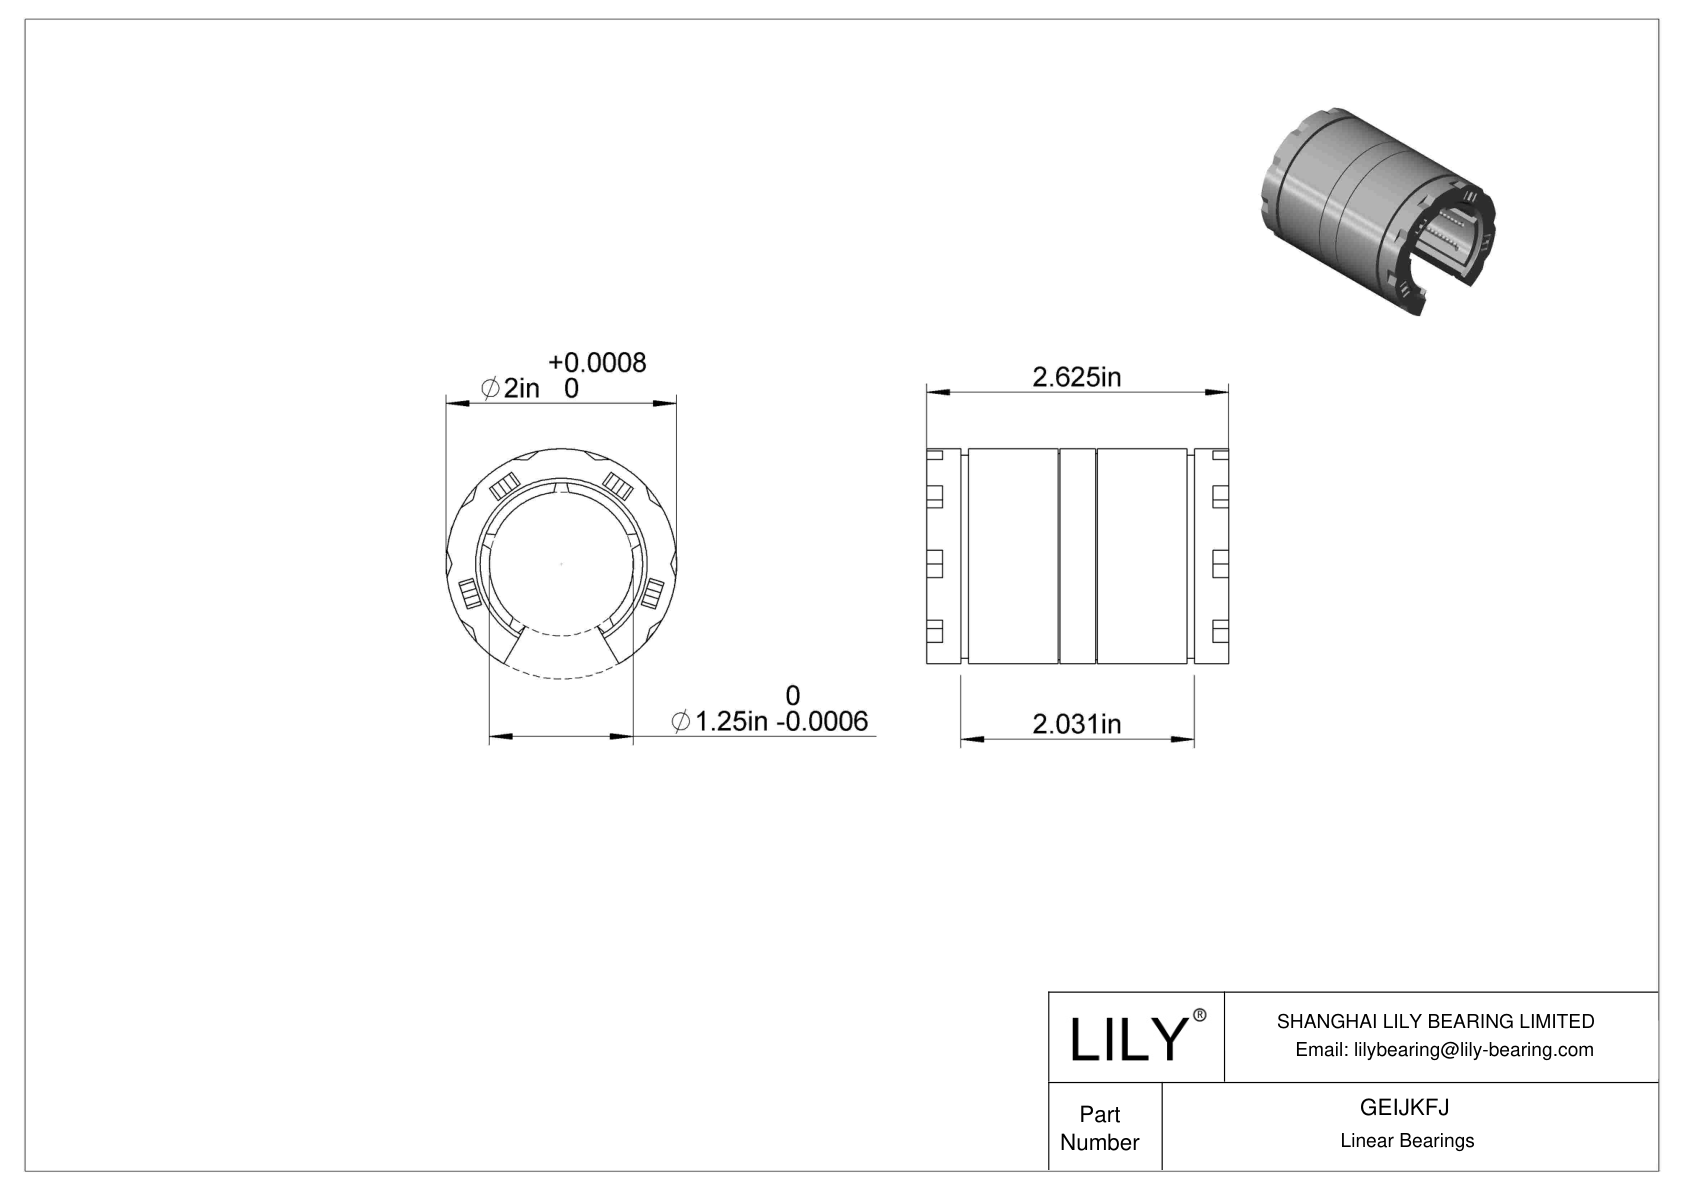 GEIJKFJ High-Load Linear Ball Bearings for Support Rail Shafts cad drawing